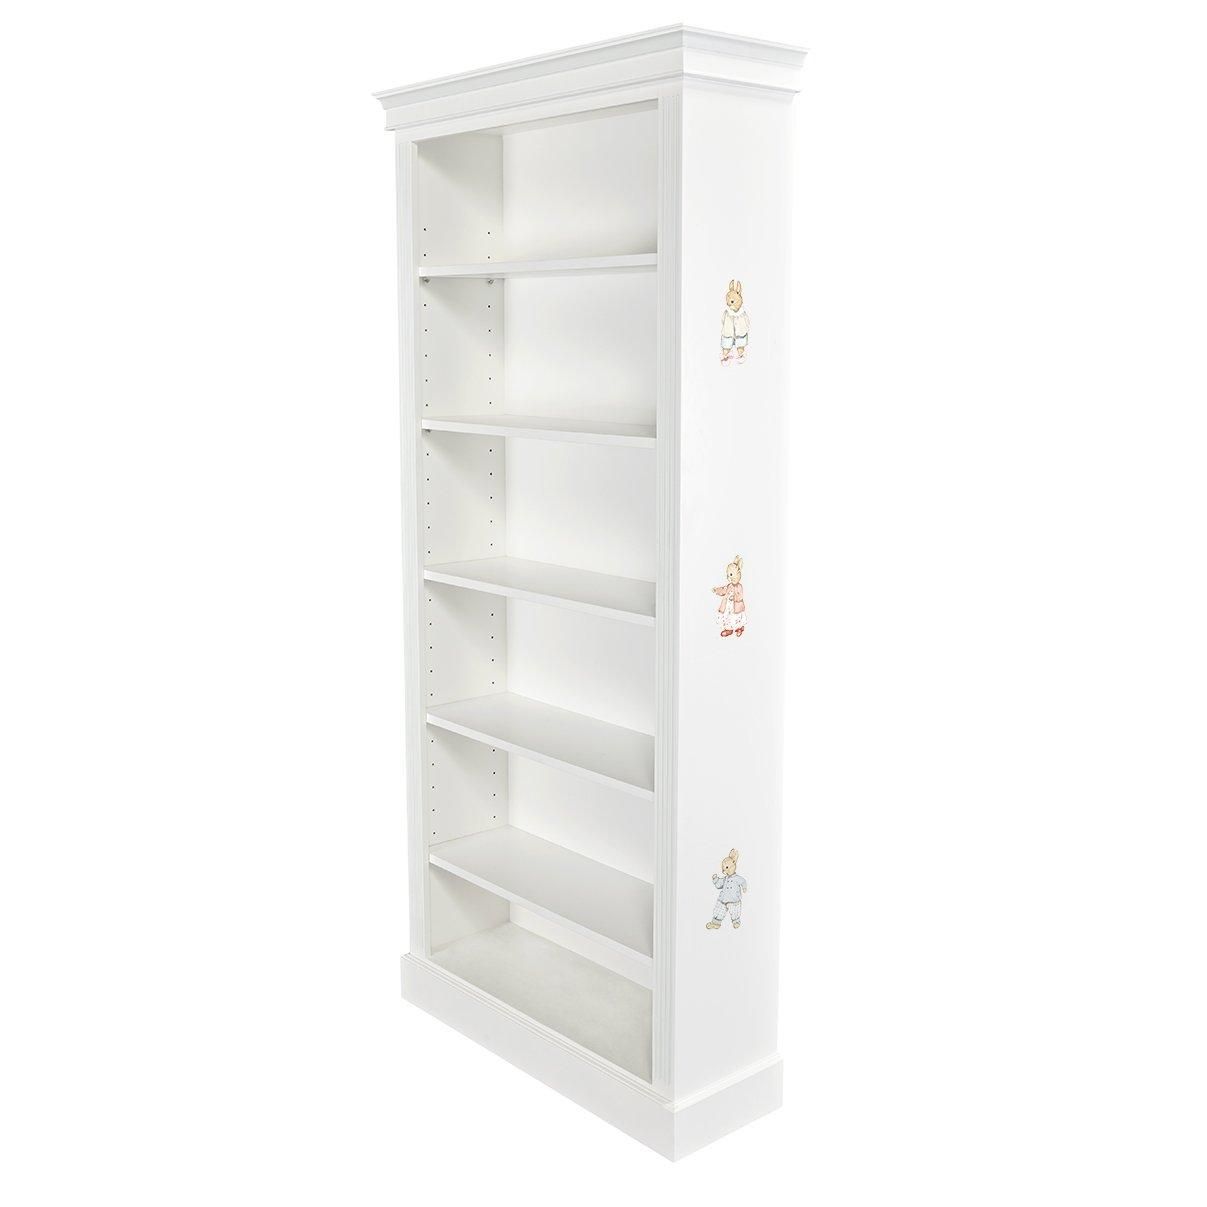 Large childrens bookcase with Designer Bunnies paintings | Dragons of Walton Street